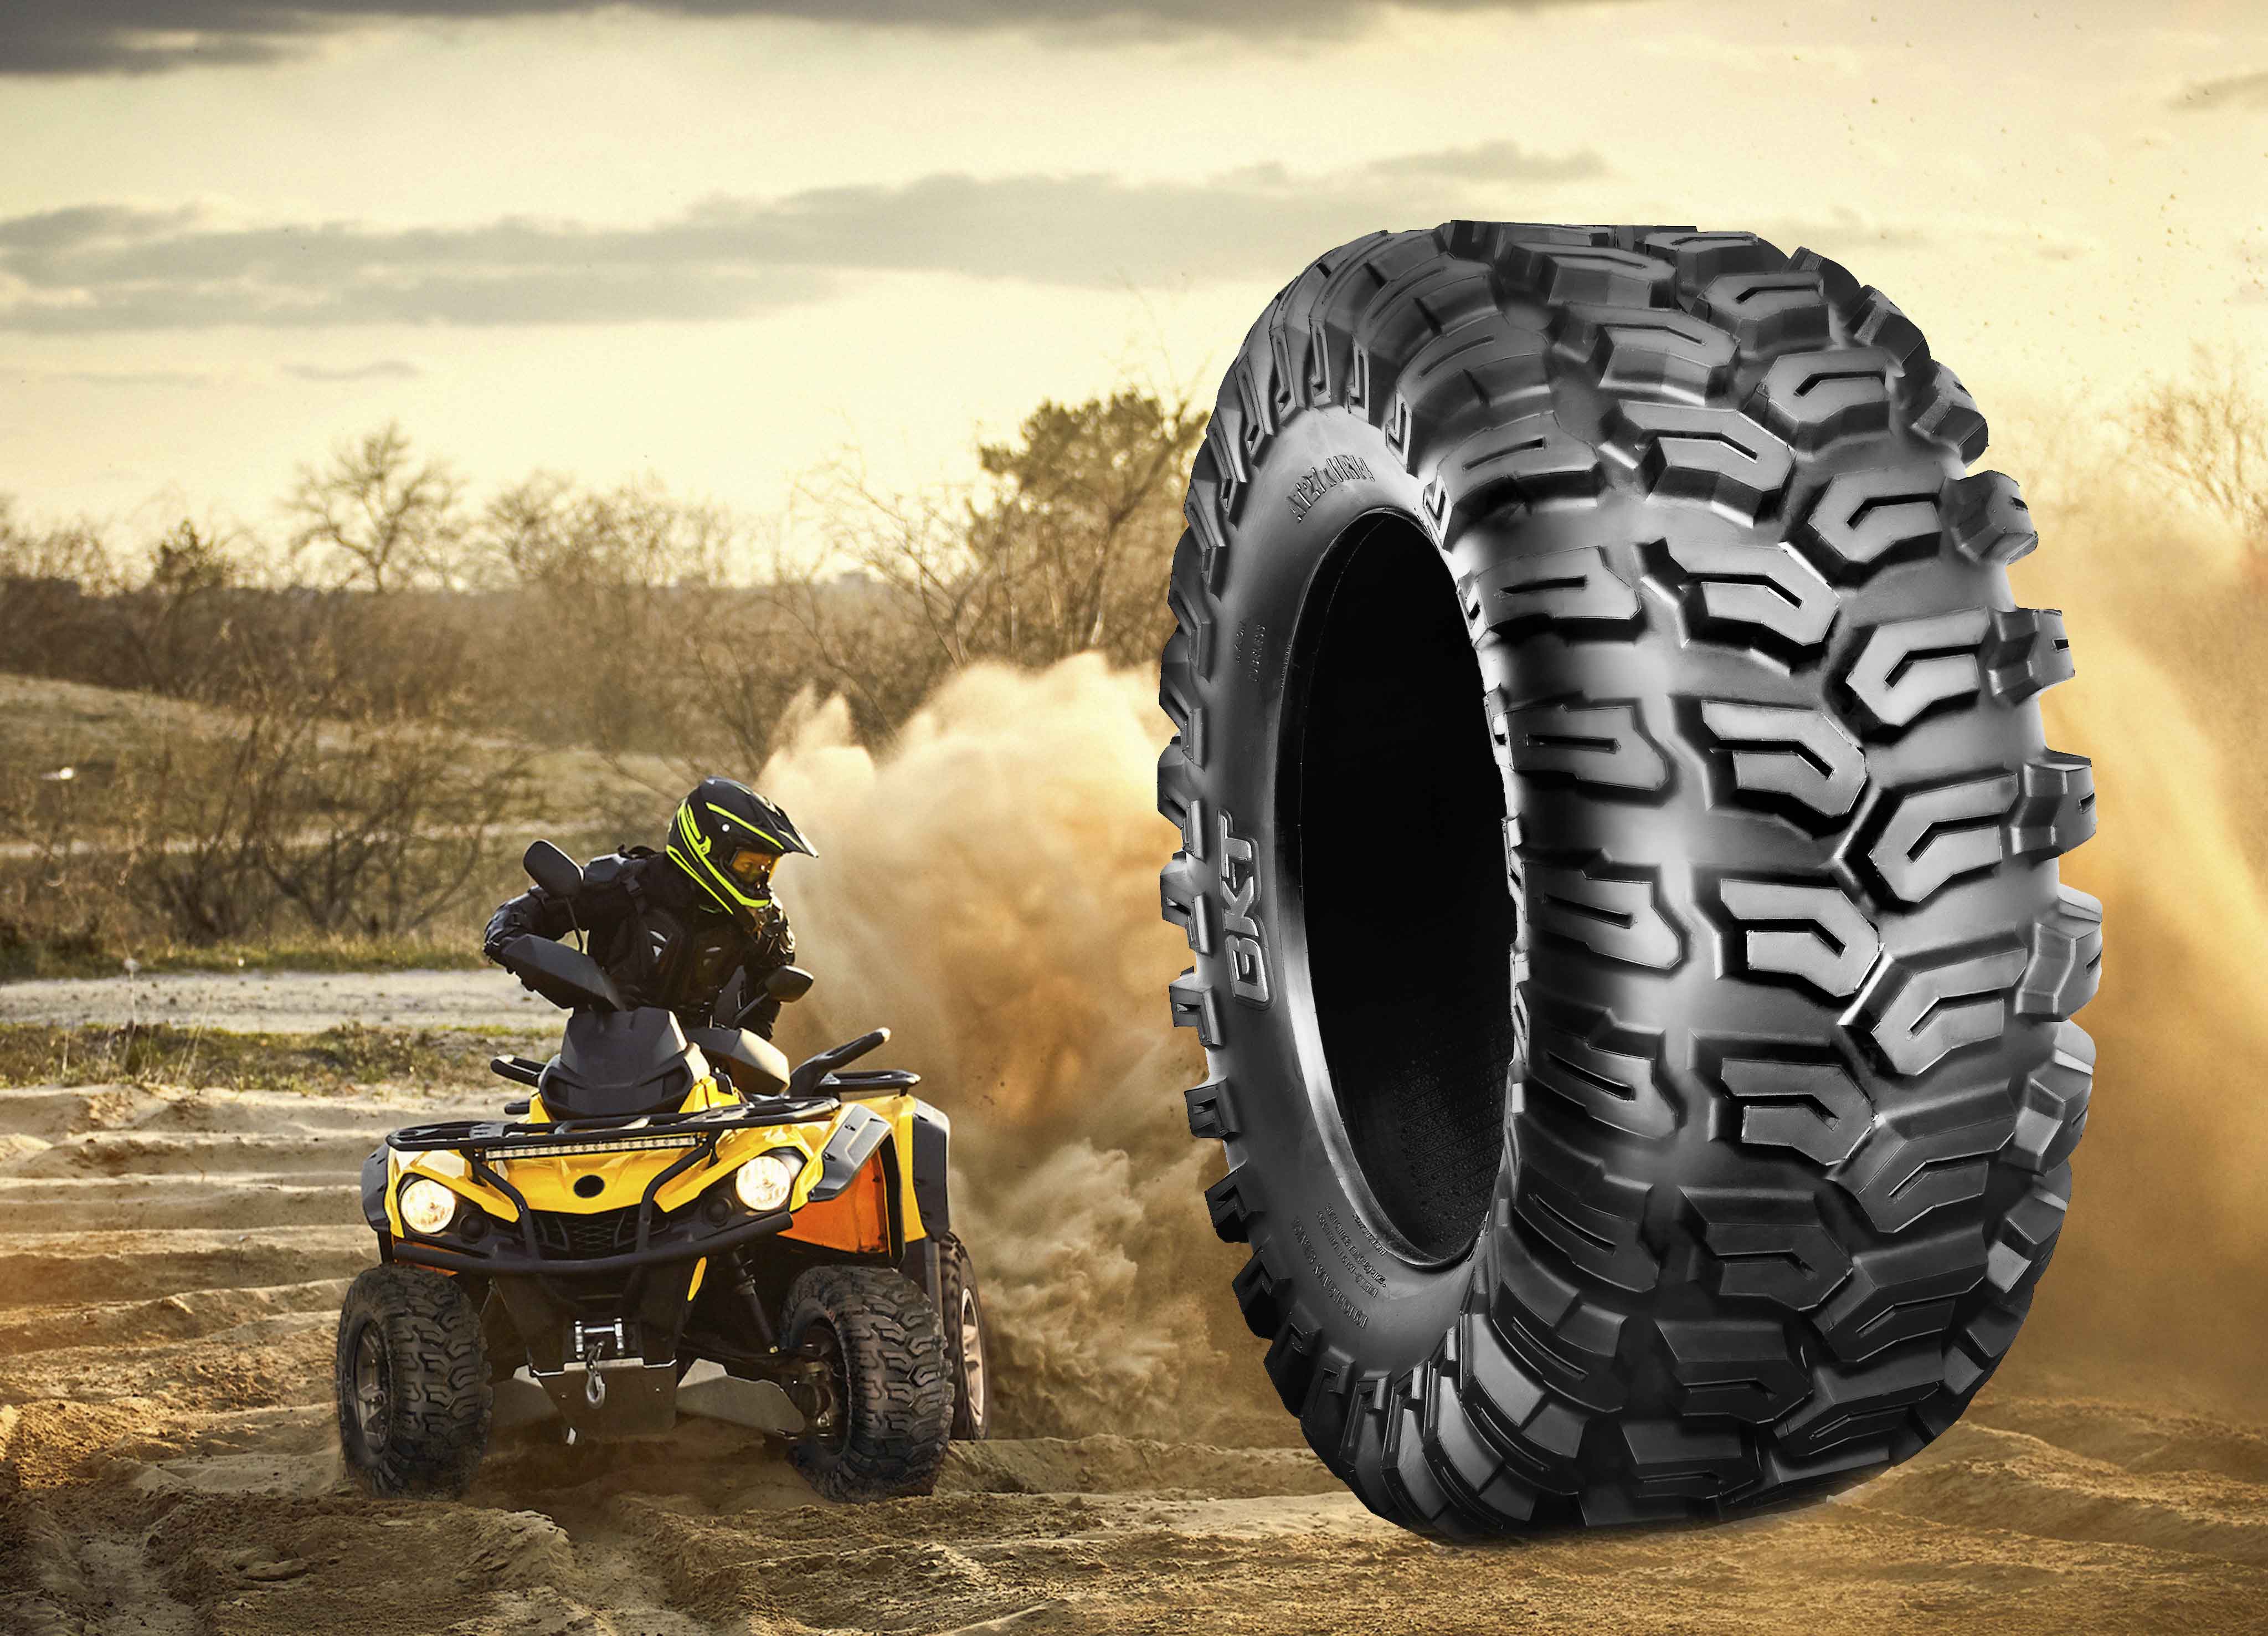 Sierra Max Pro Is Born, The New ‘Made In Bkt’ Tire